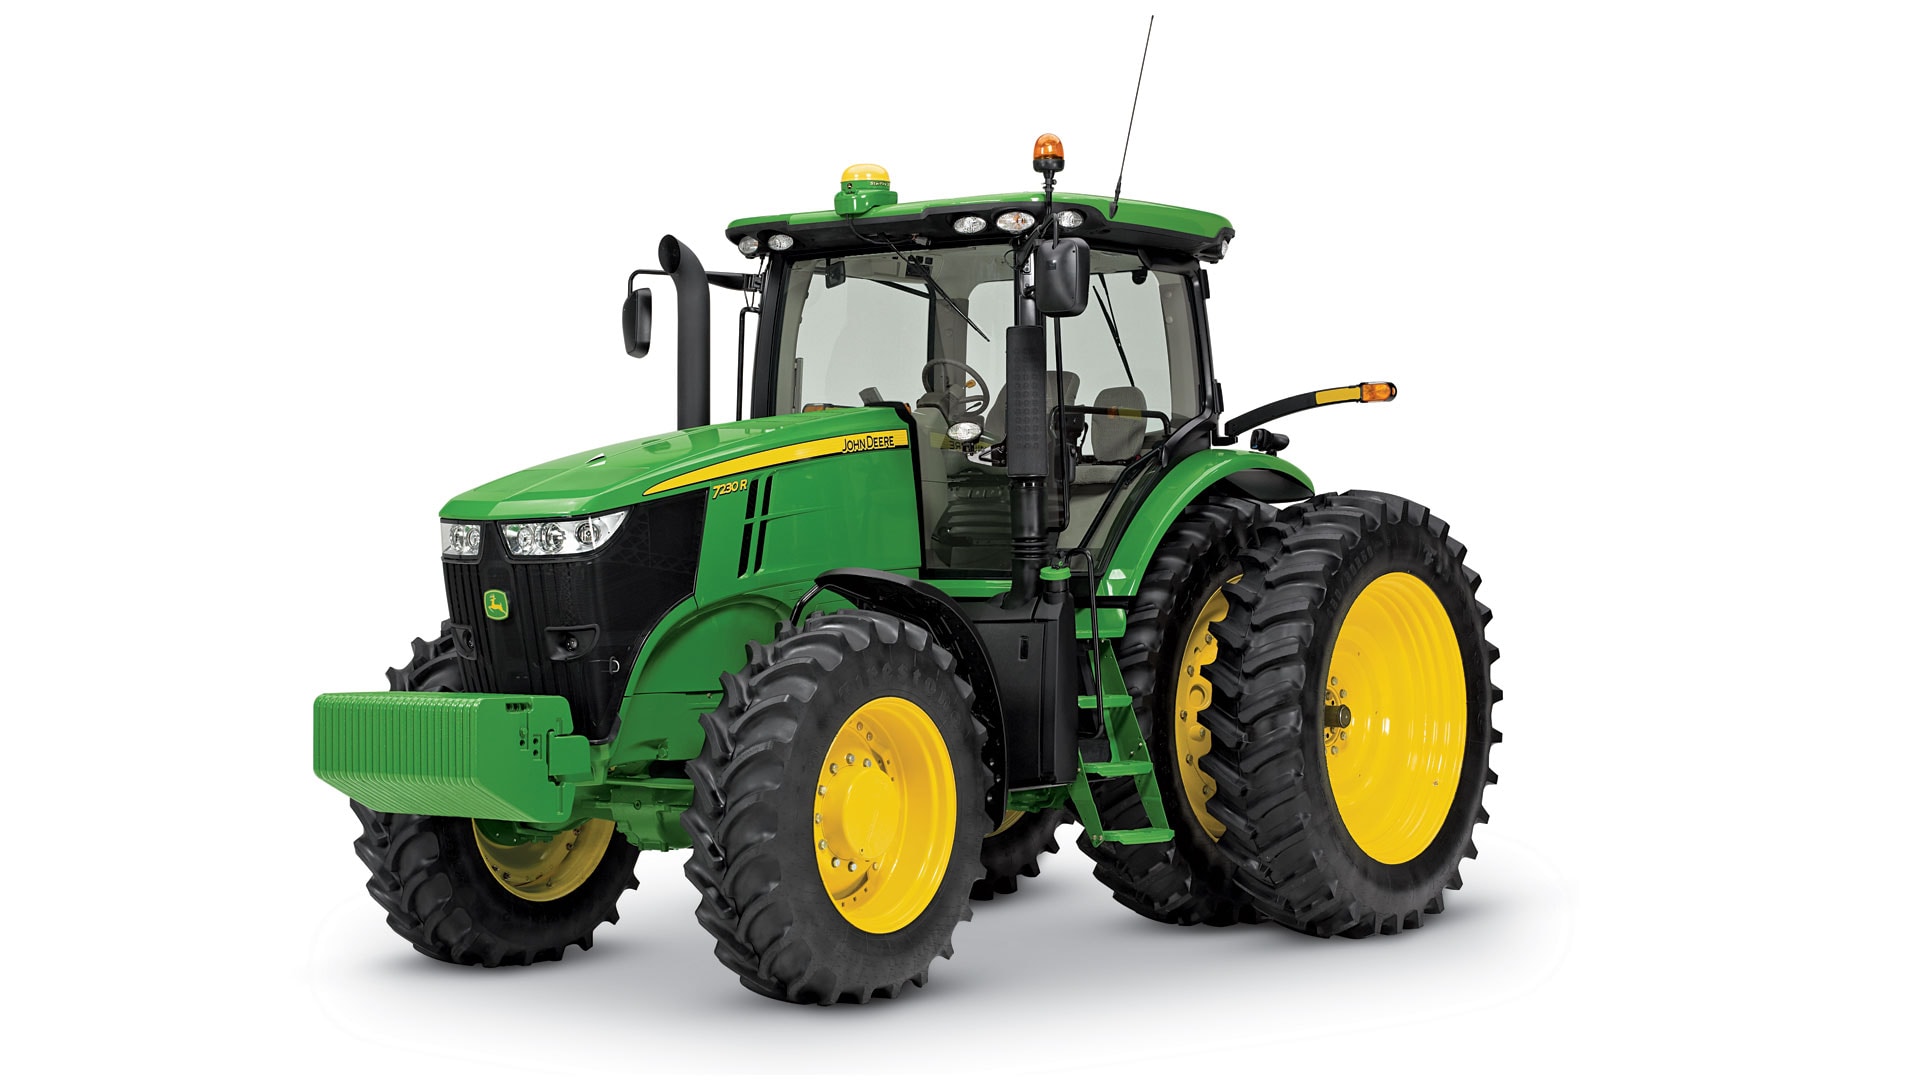 View the 7R Series Tractors